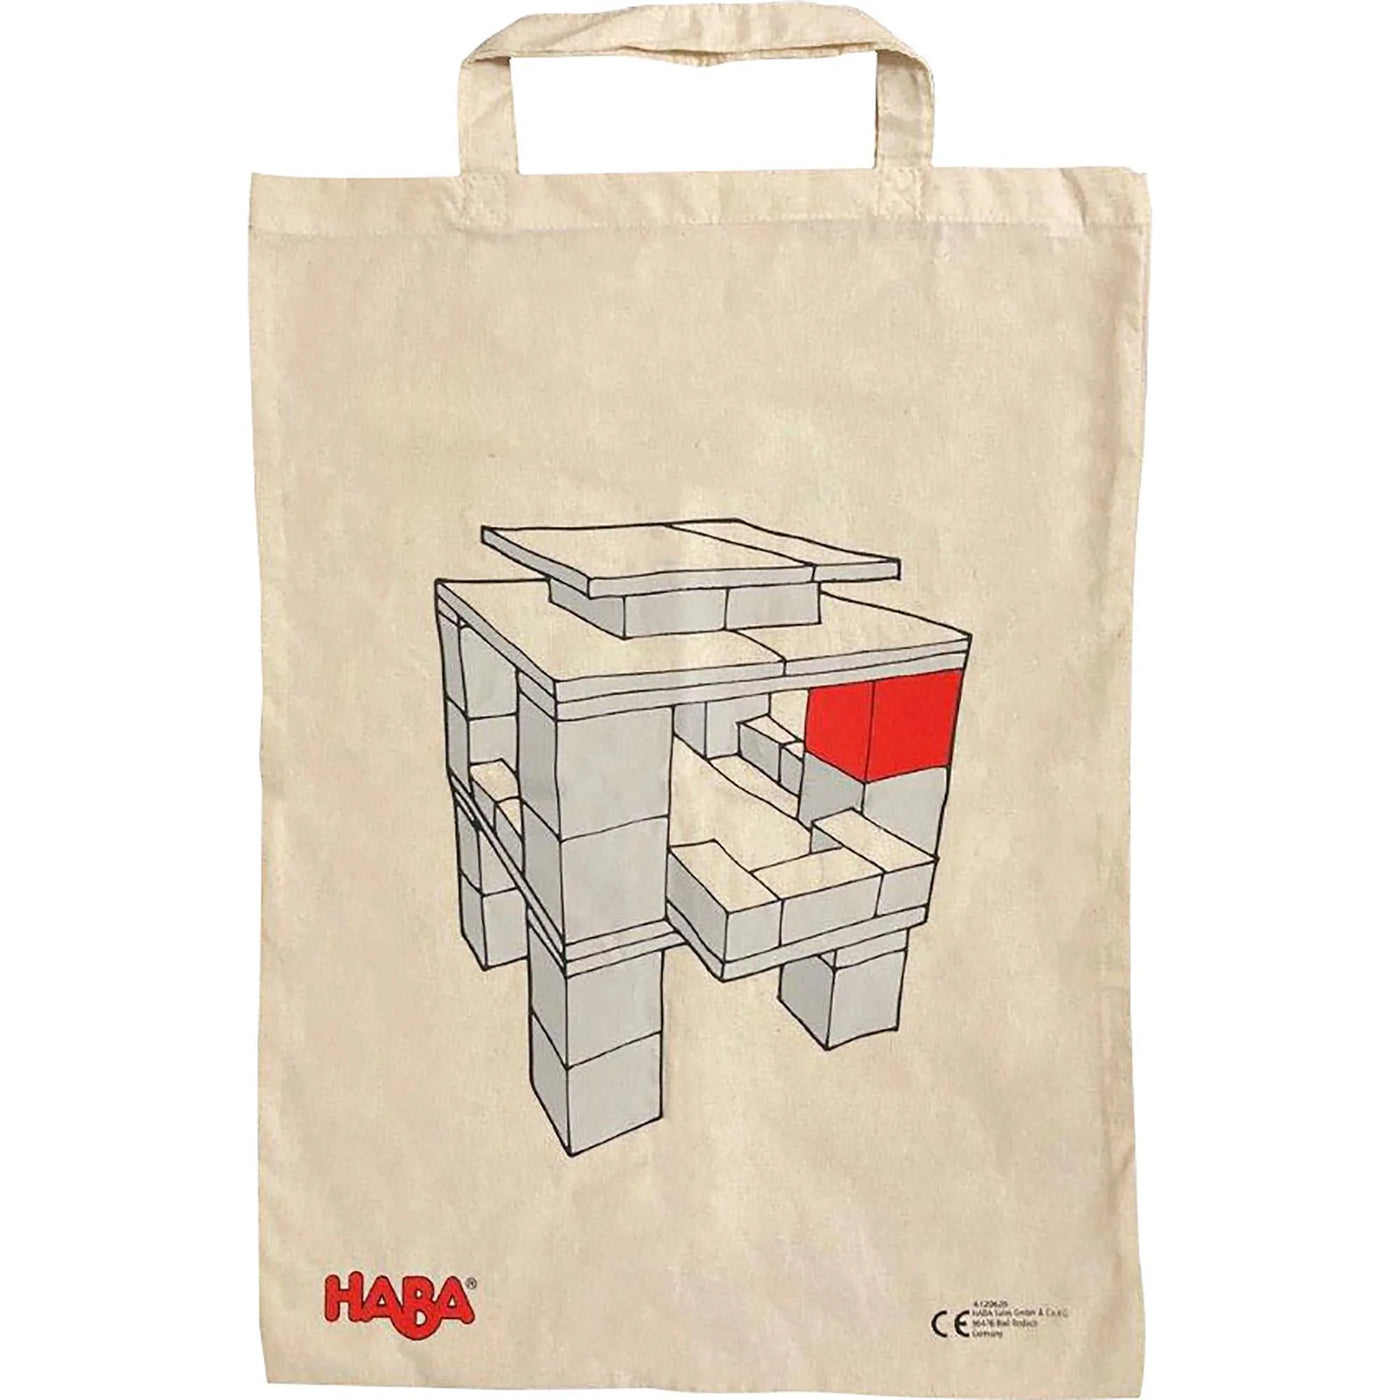 Haba - Clever up 4.0